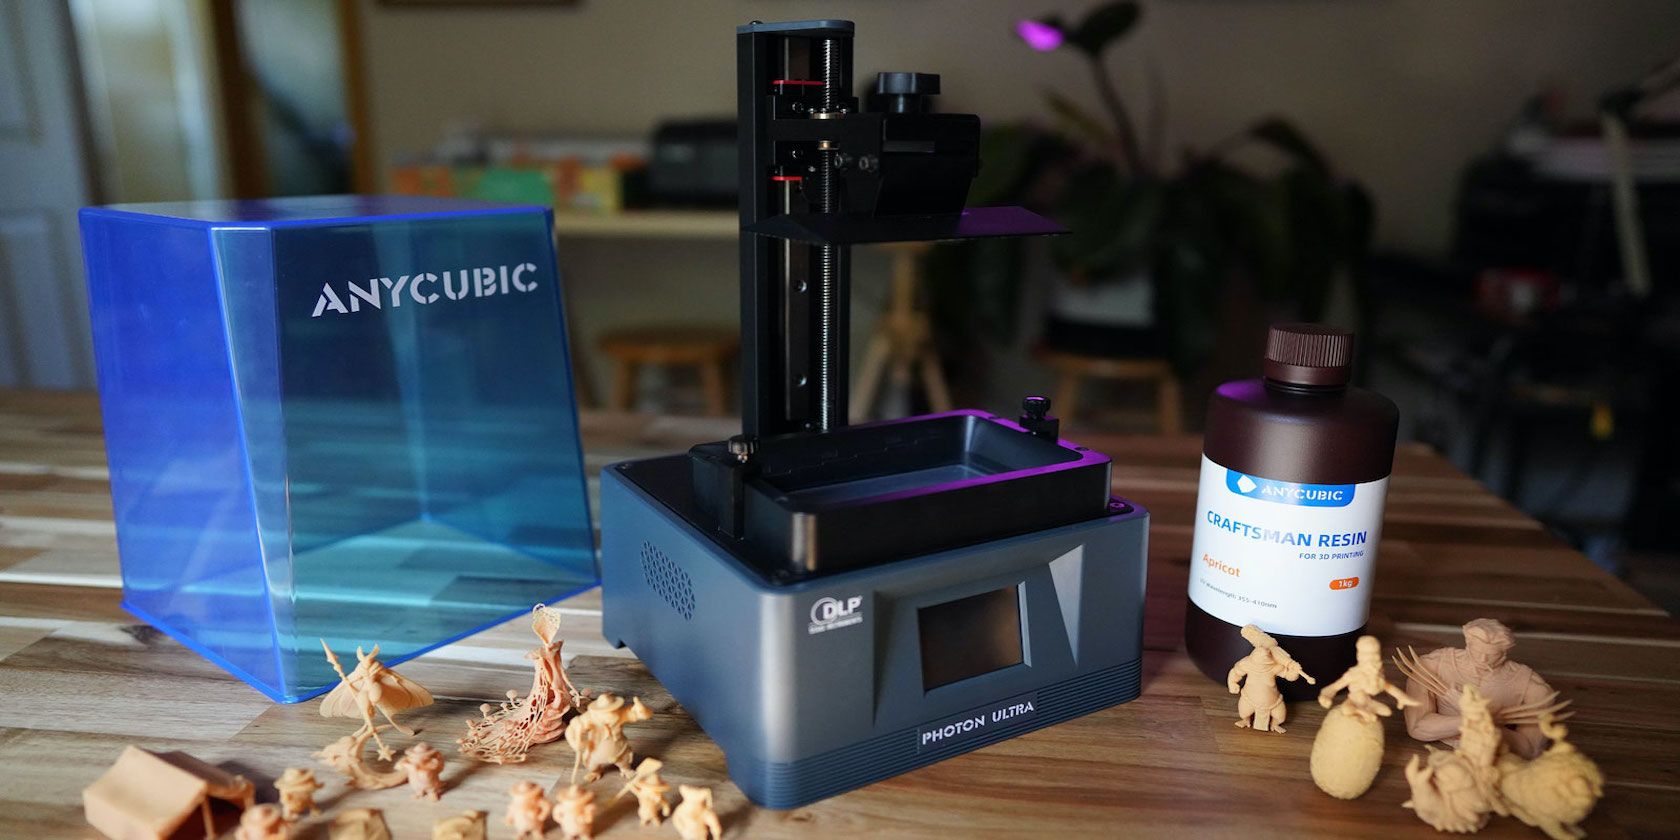 Tak for din hjælp fugtighed teenagere Anycubic Photon Ultra Review: Quiet, Power-Saving, and Budget-Friendly  Resin Printer With DLP Technology